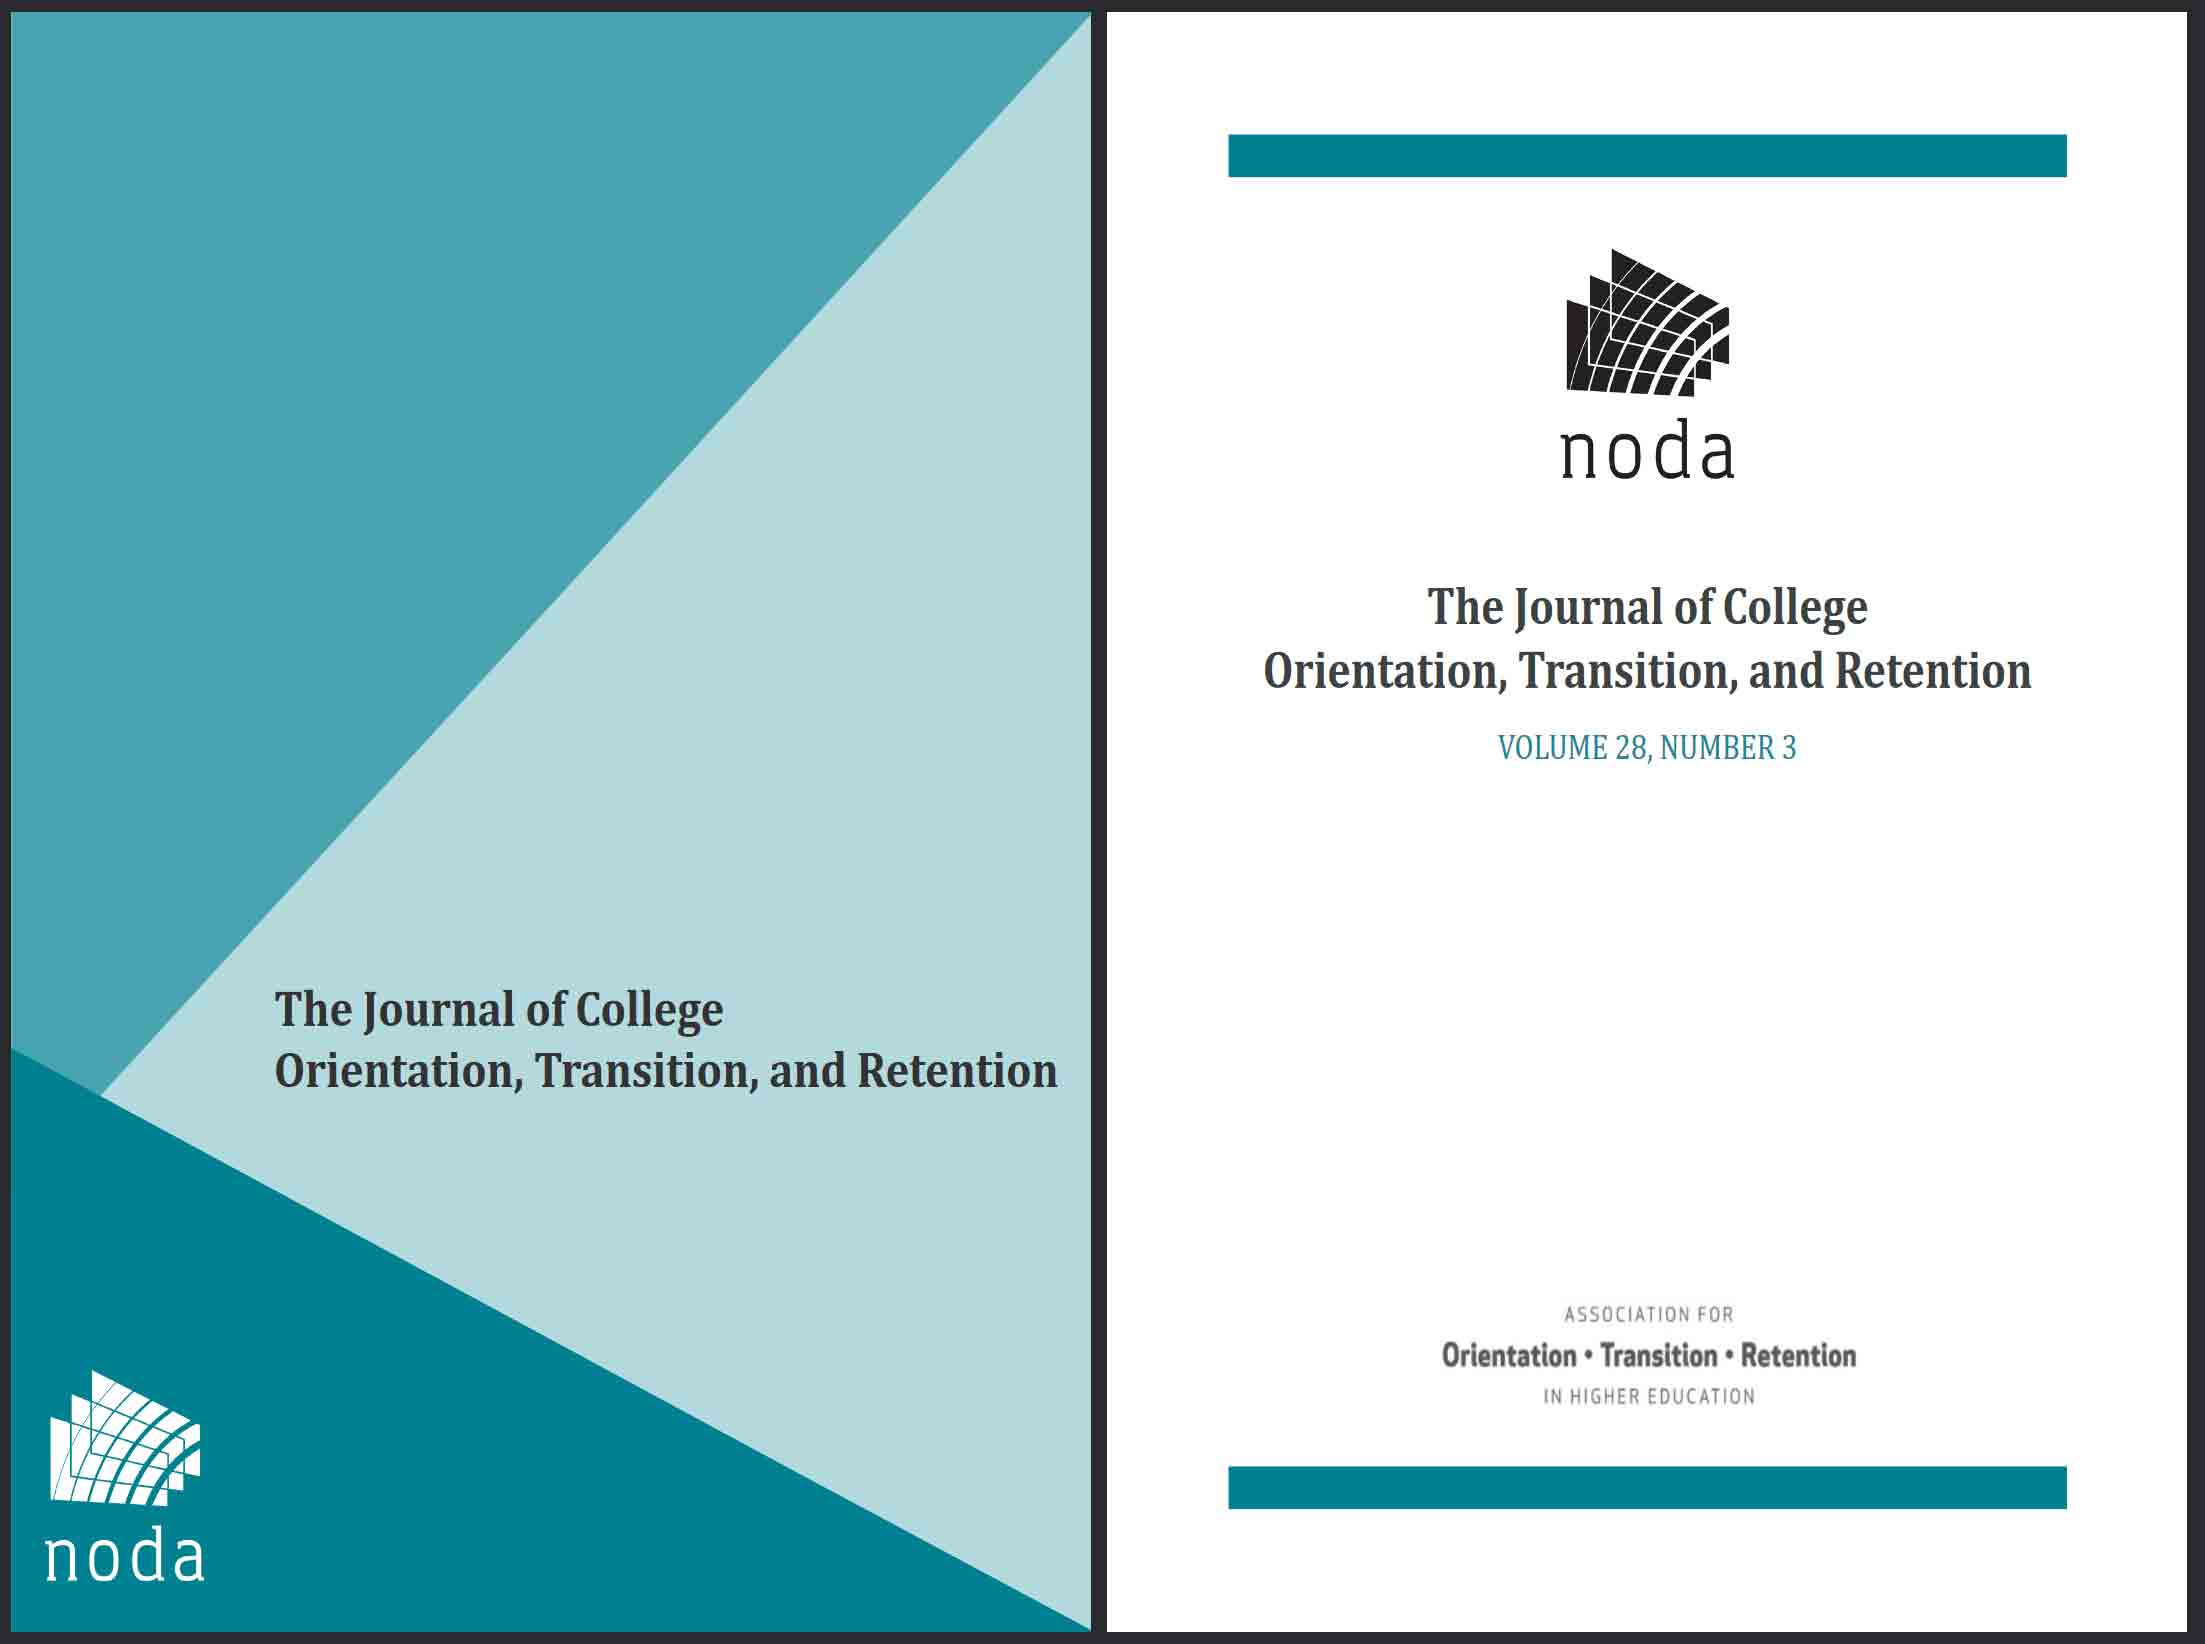 Two pages from the journal of college orientation, transition, and retention